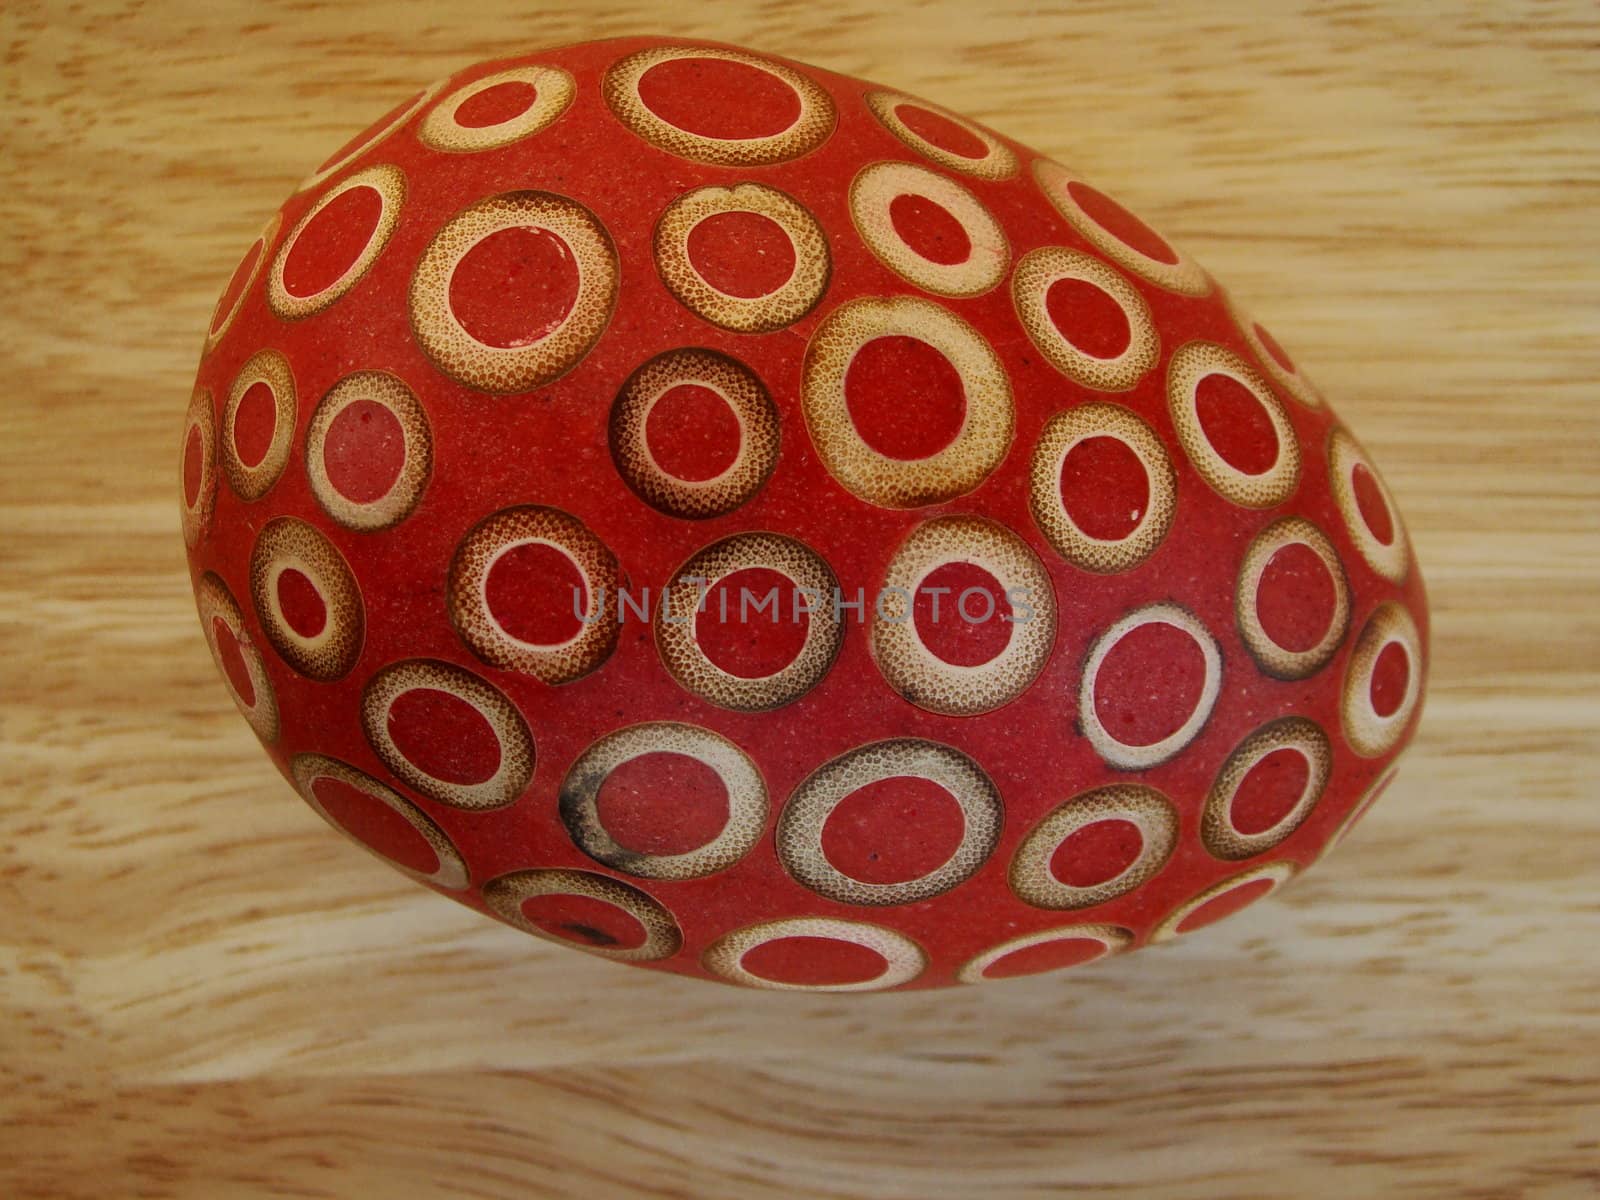 easter egg with decorative design